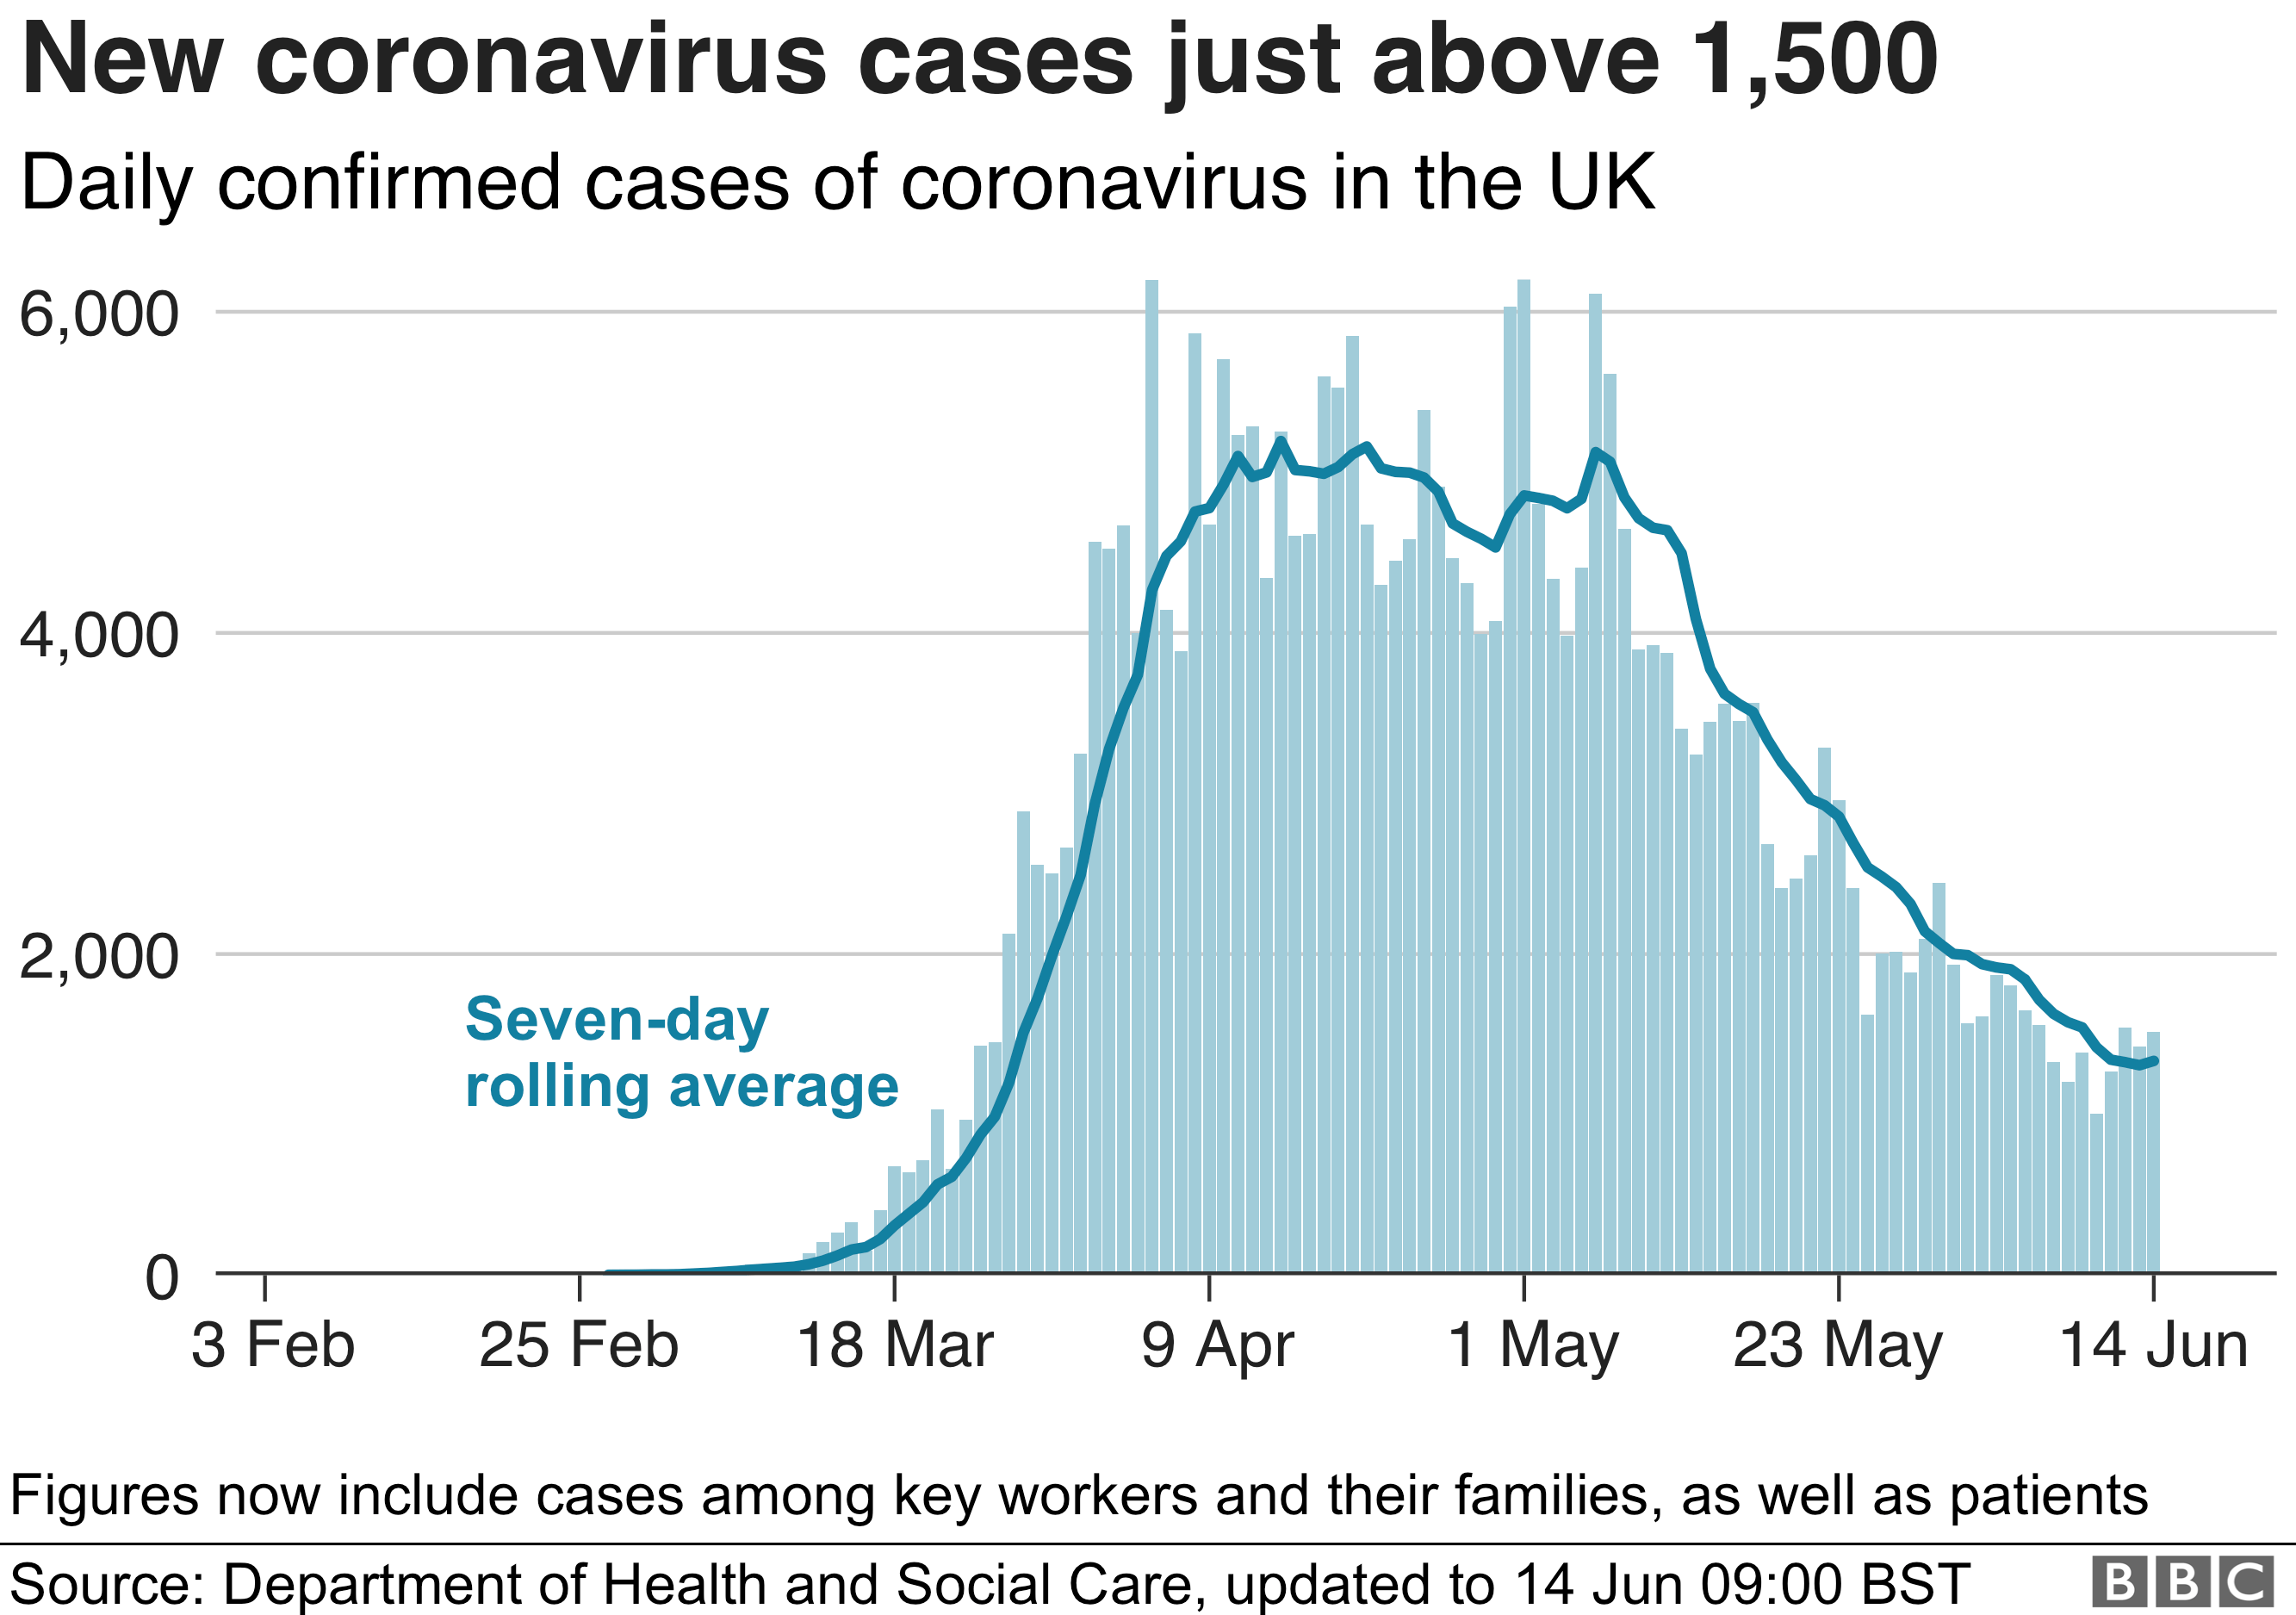 Chart showing daily new confirmed coronavirus cases and seven-day rolling average